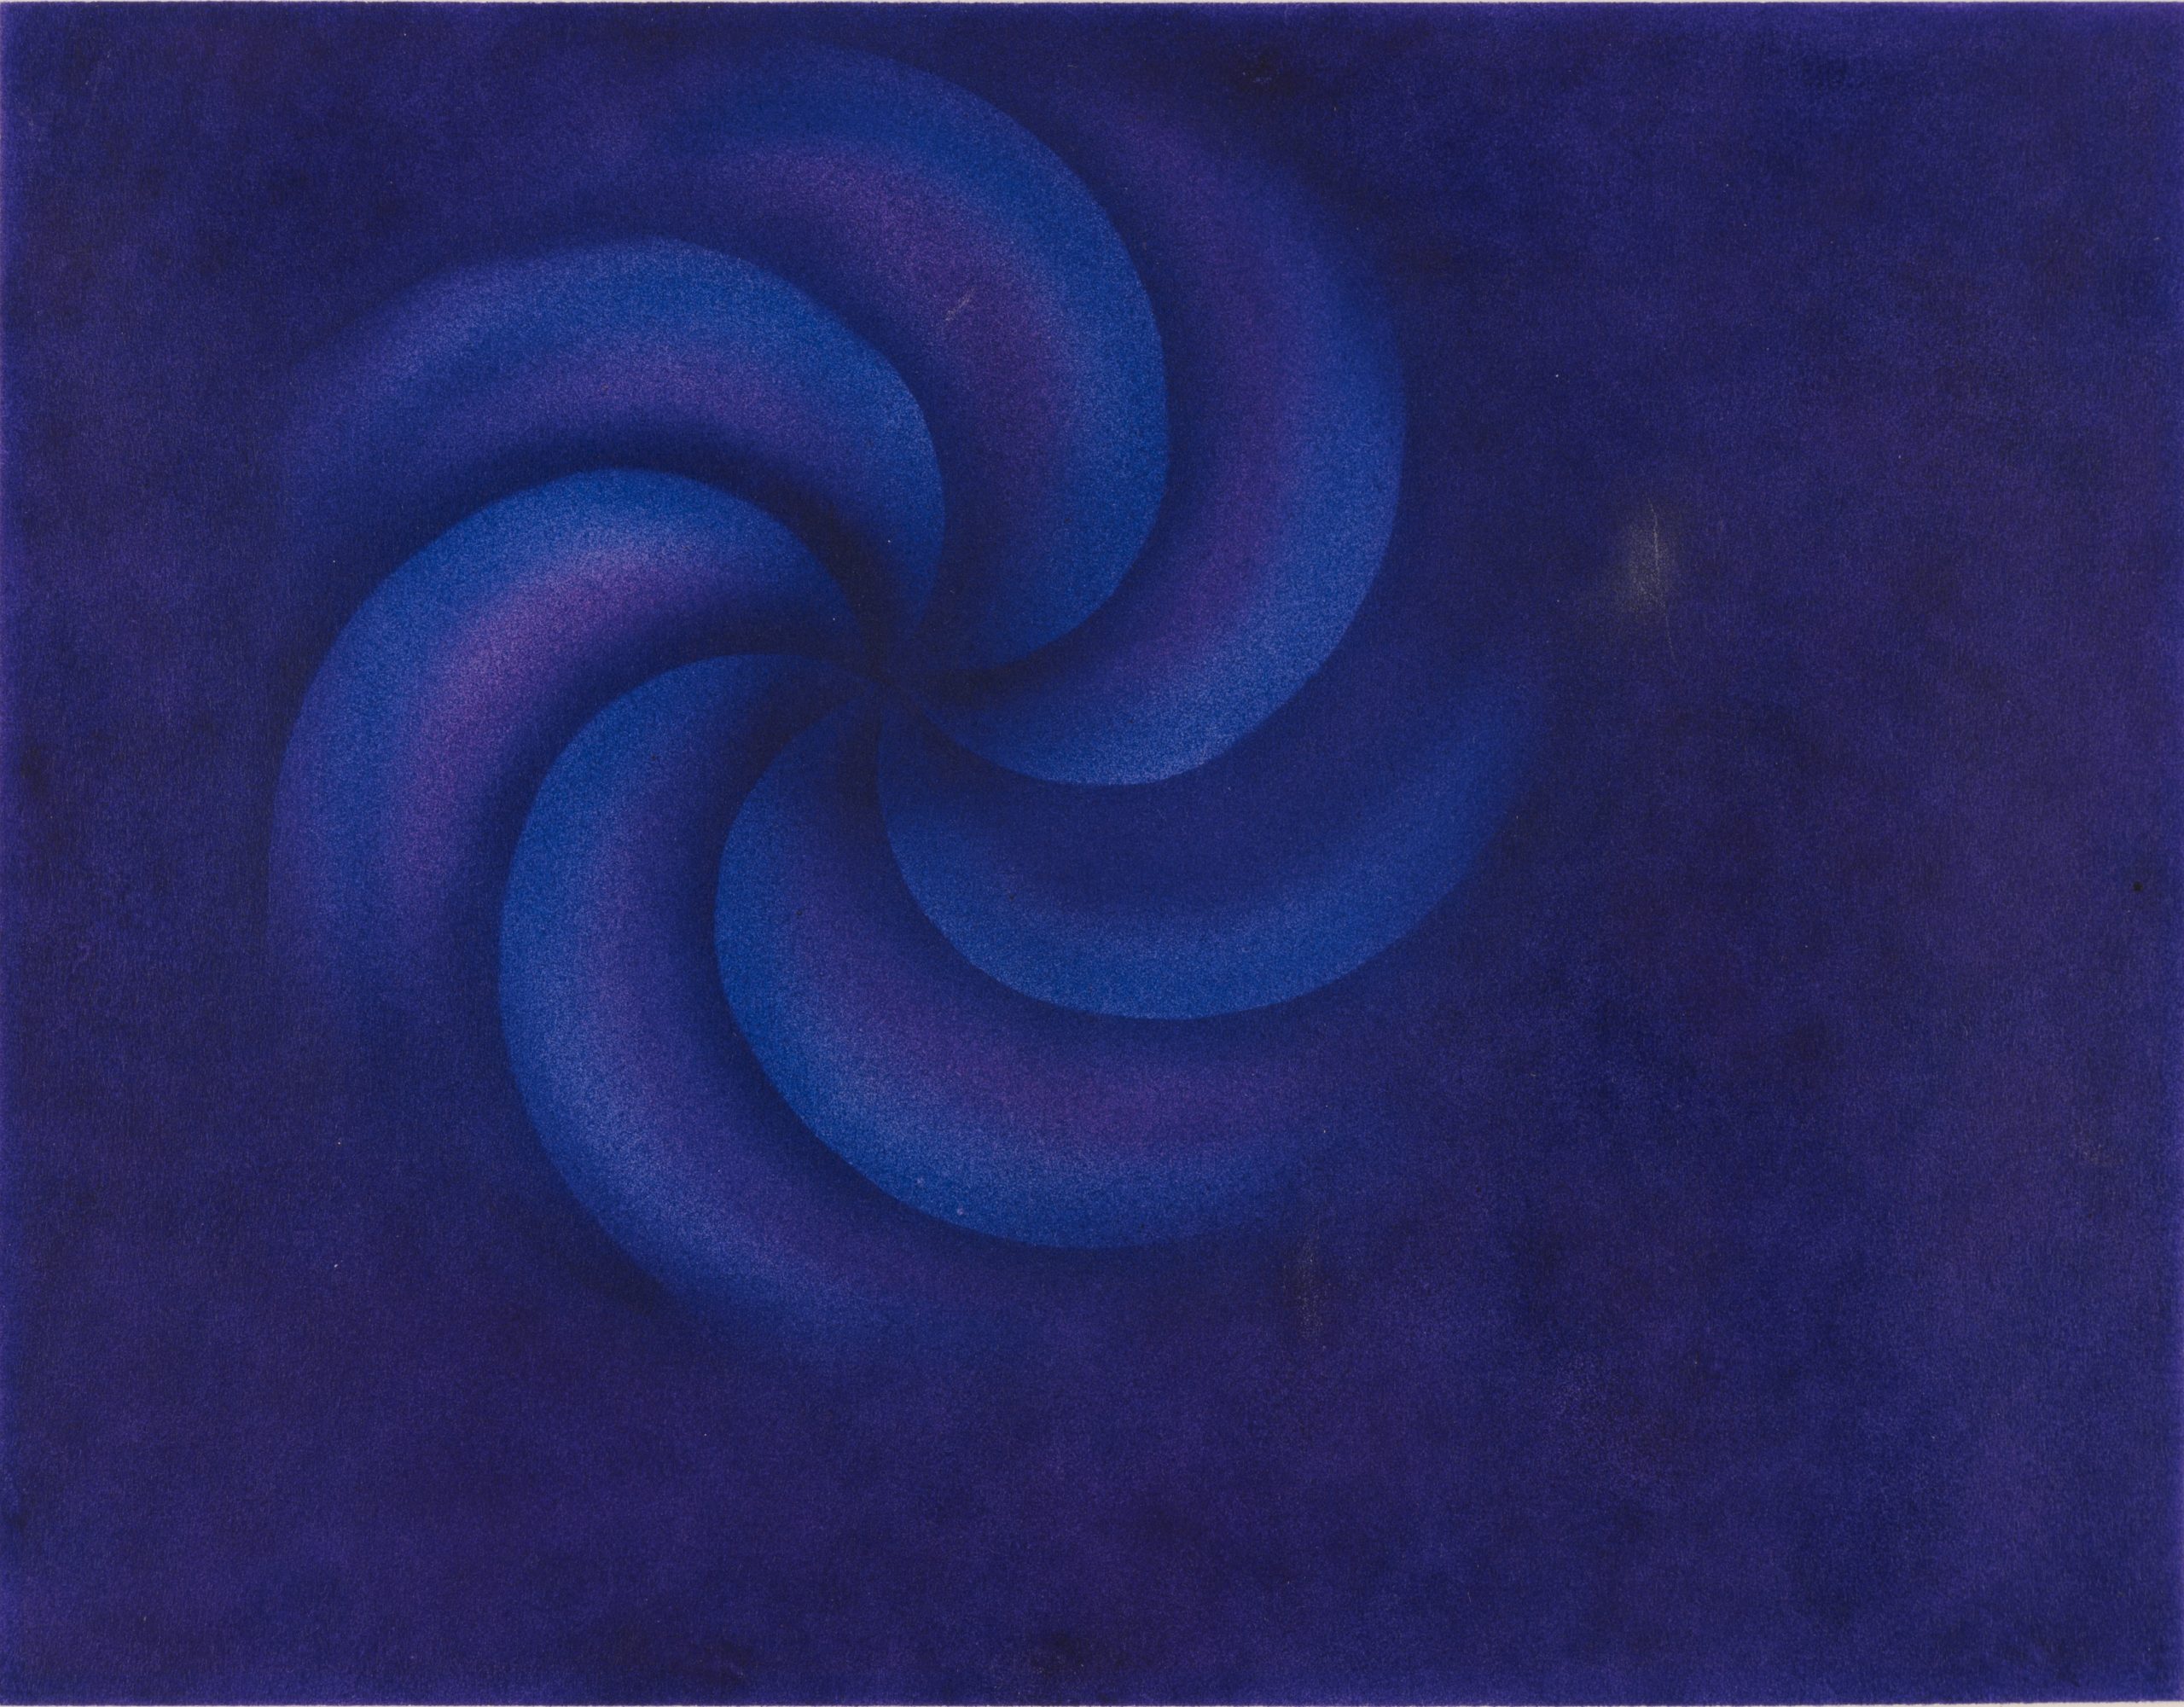 Horace Towner Pierce, Frame 2, First Movement, (Birth) from The Spiral Symphony, 1938, Watercolor on paper, Purchase with funds from the Edith Gregg Bequest, Raymond Jonson Collection